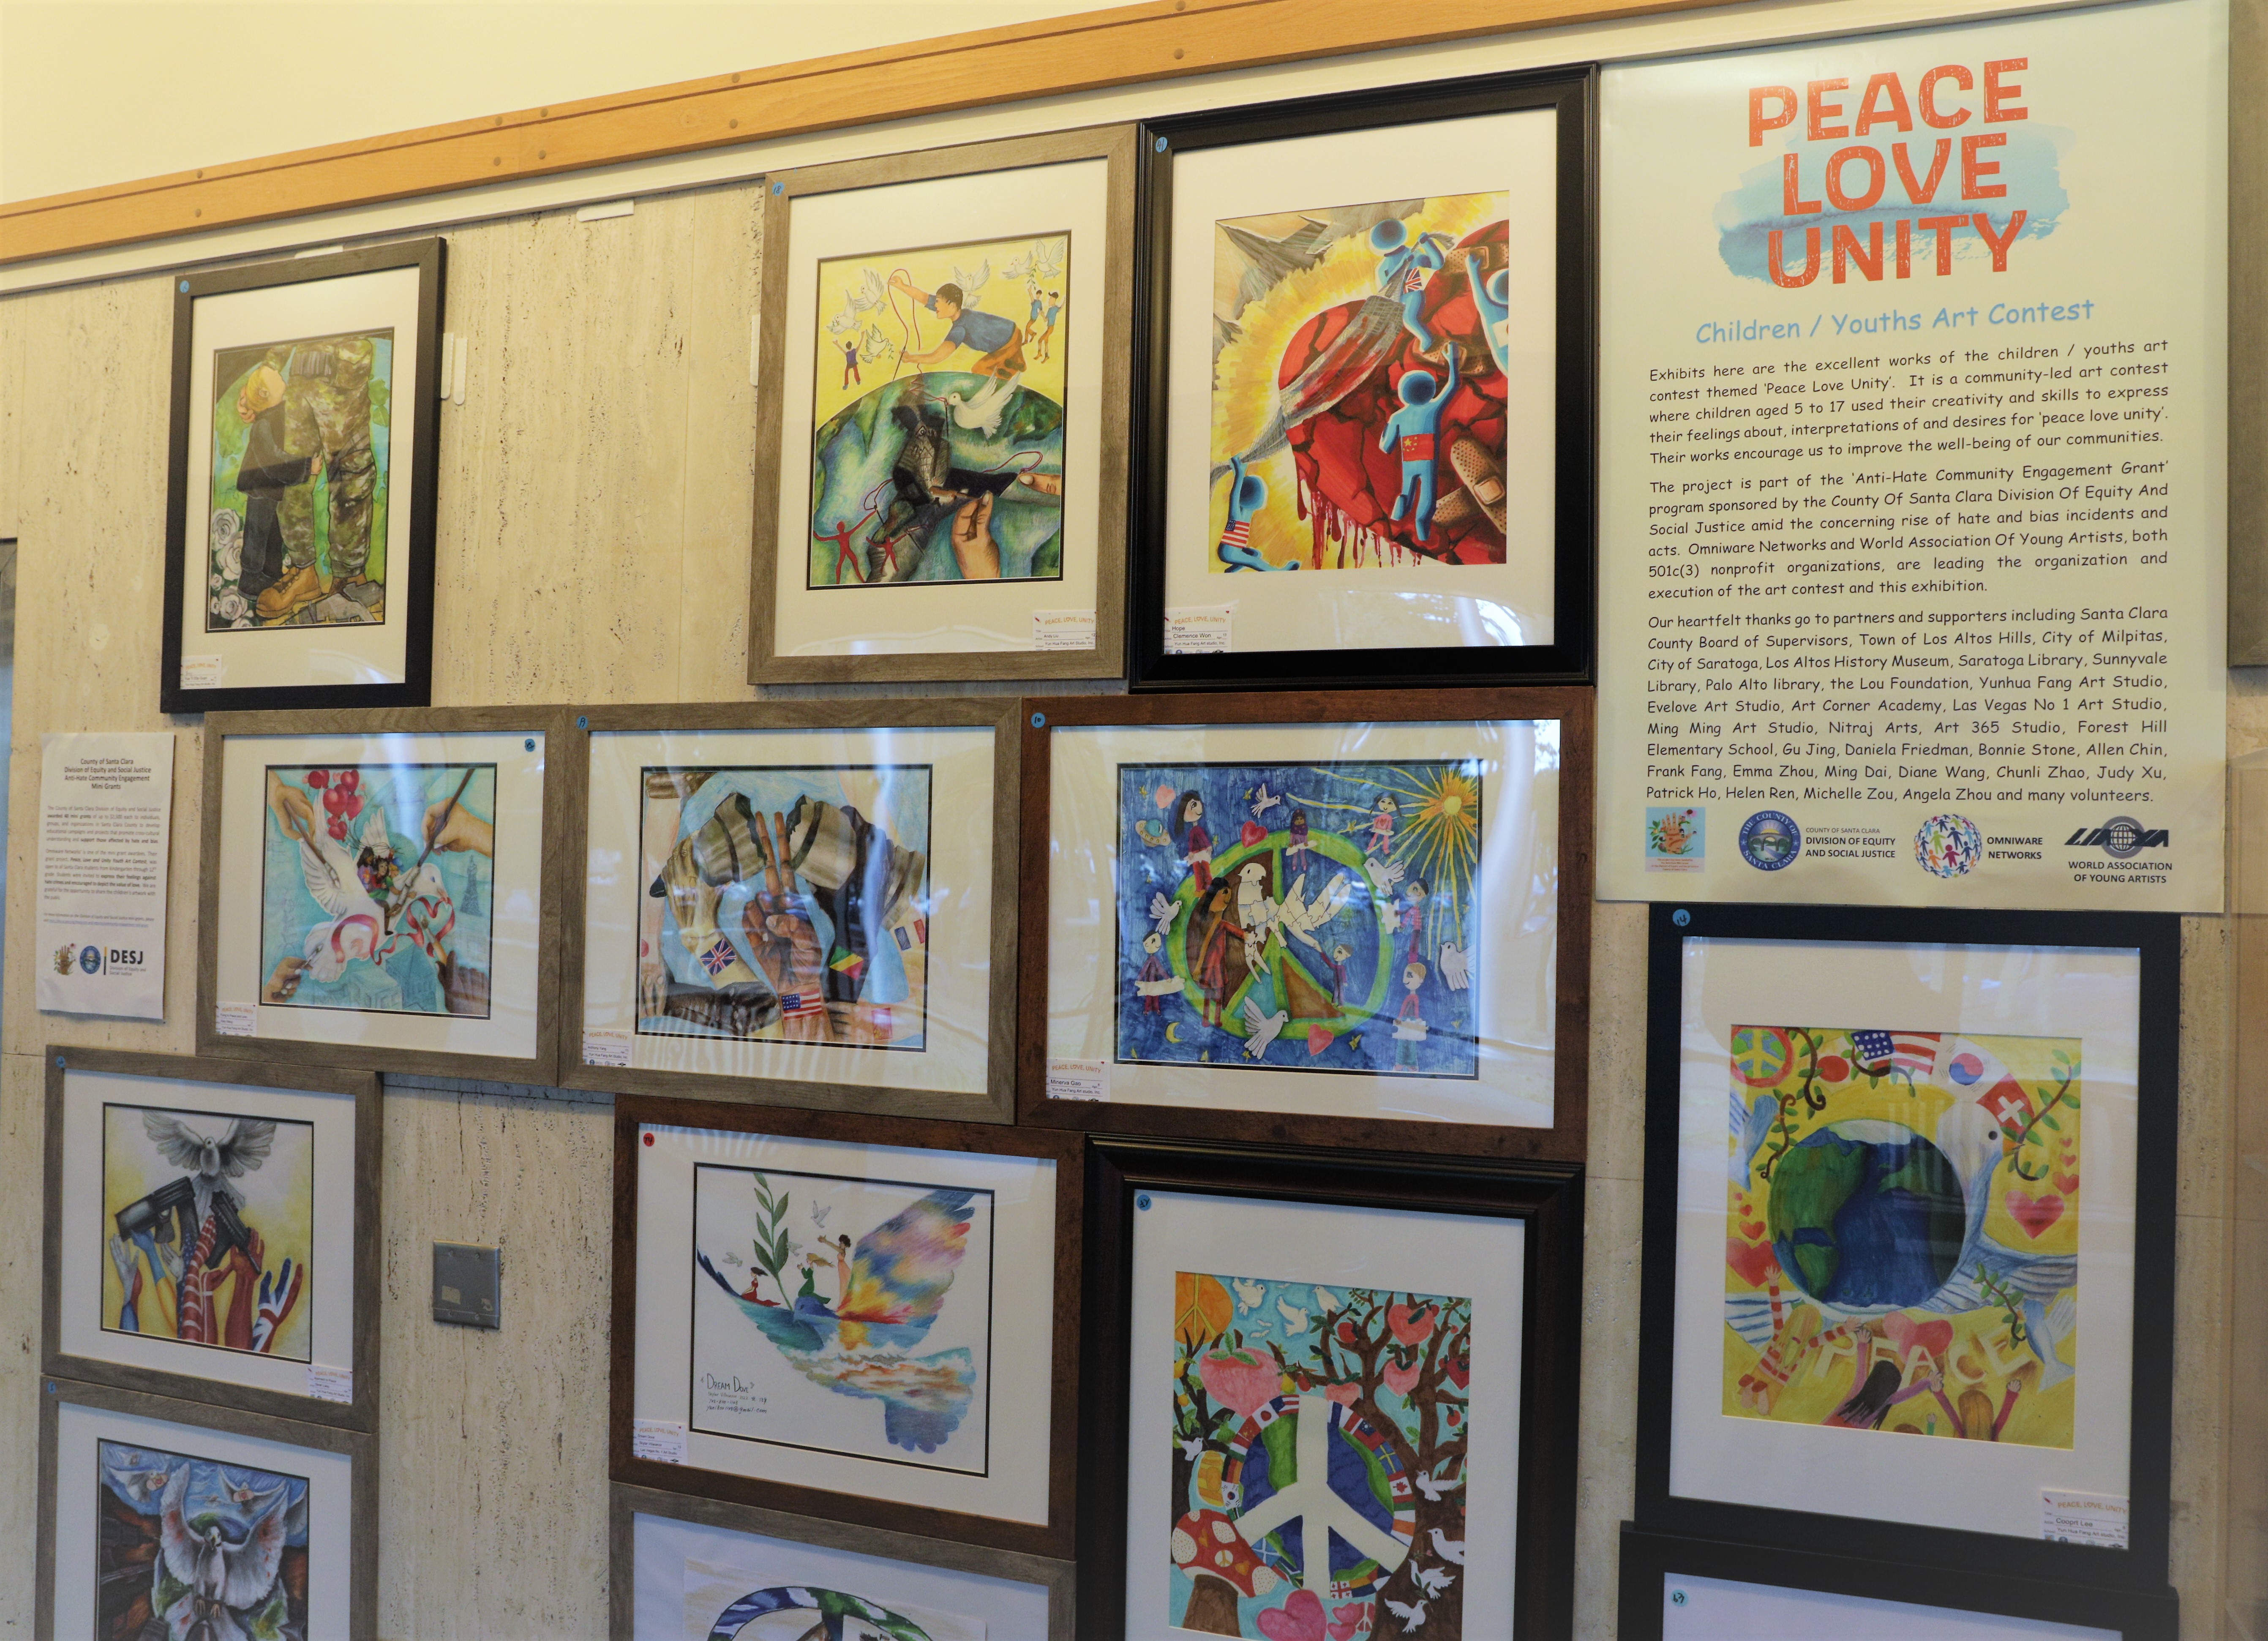 photos from the student art contest hanging in the breezeway of the County Administration Building